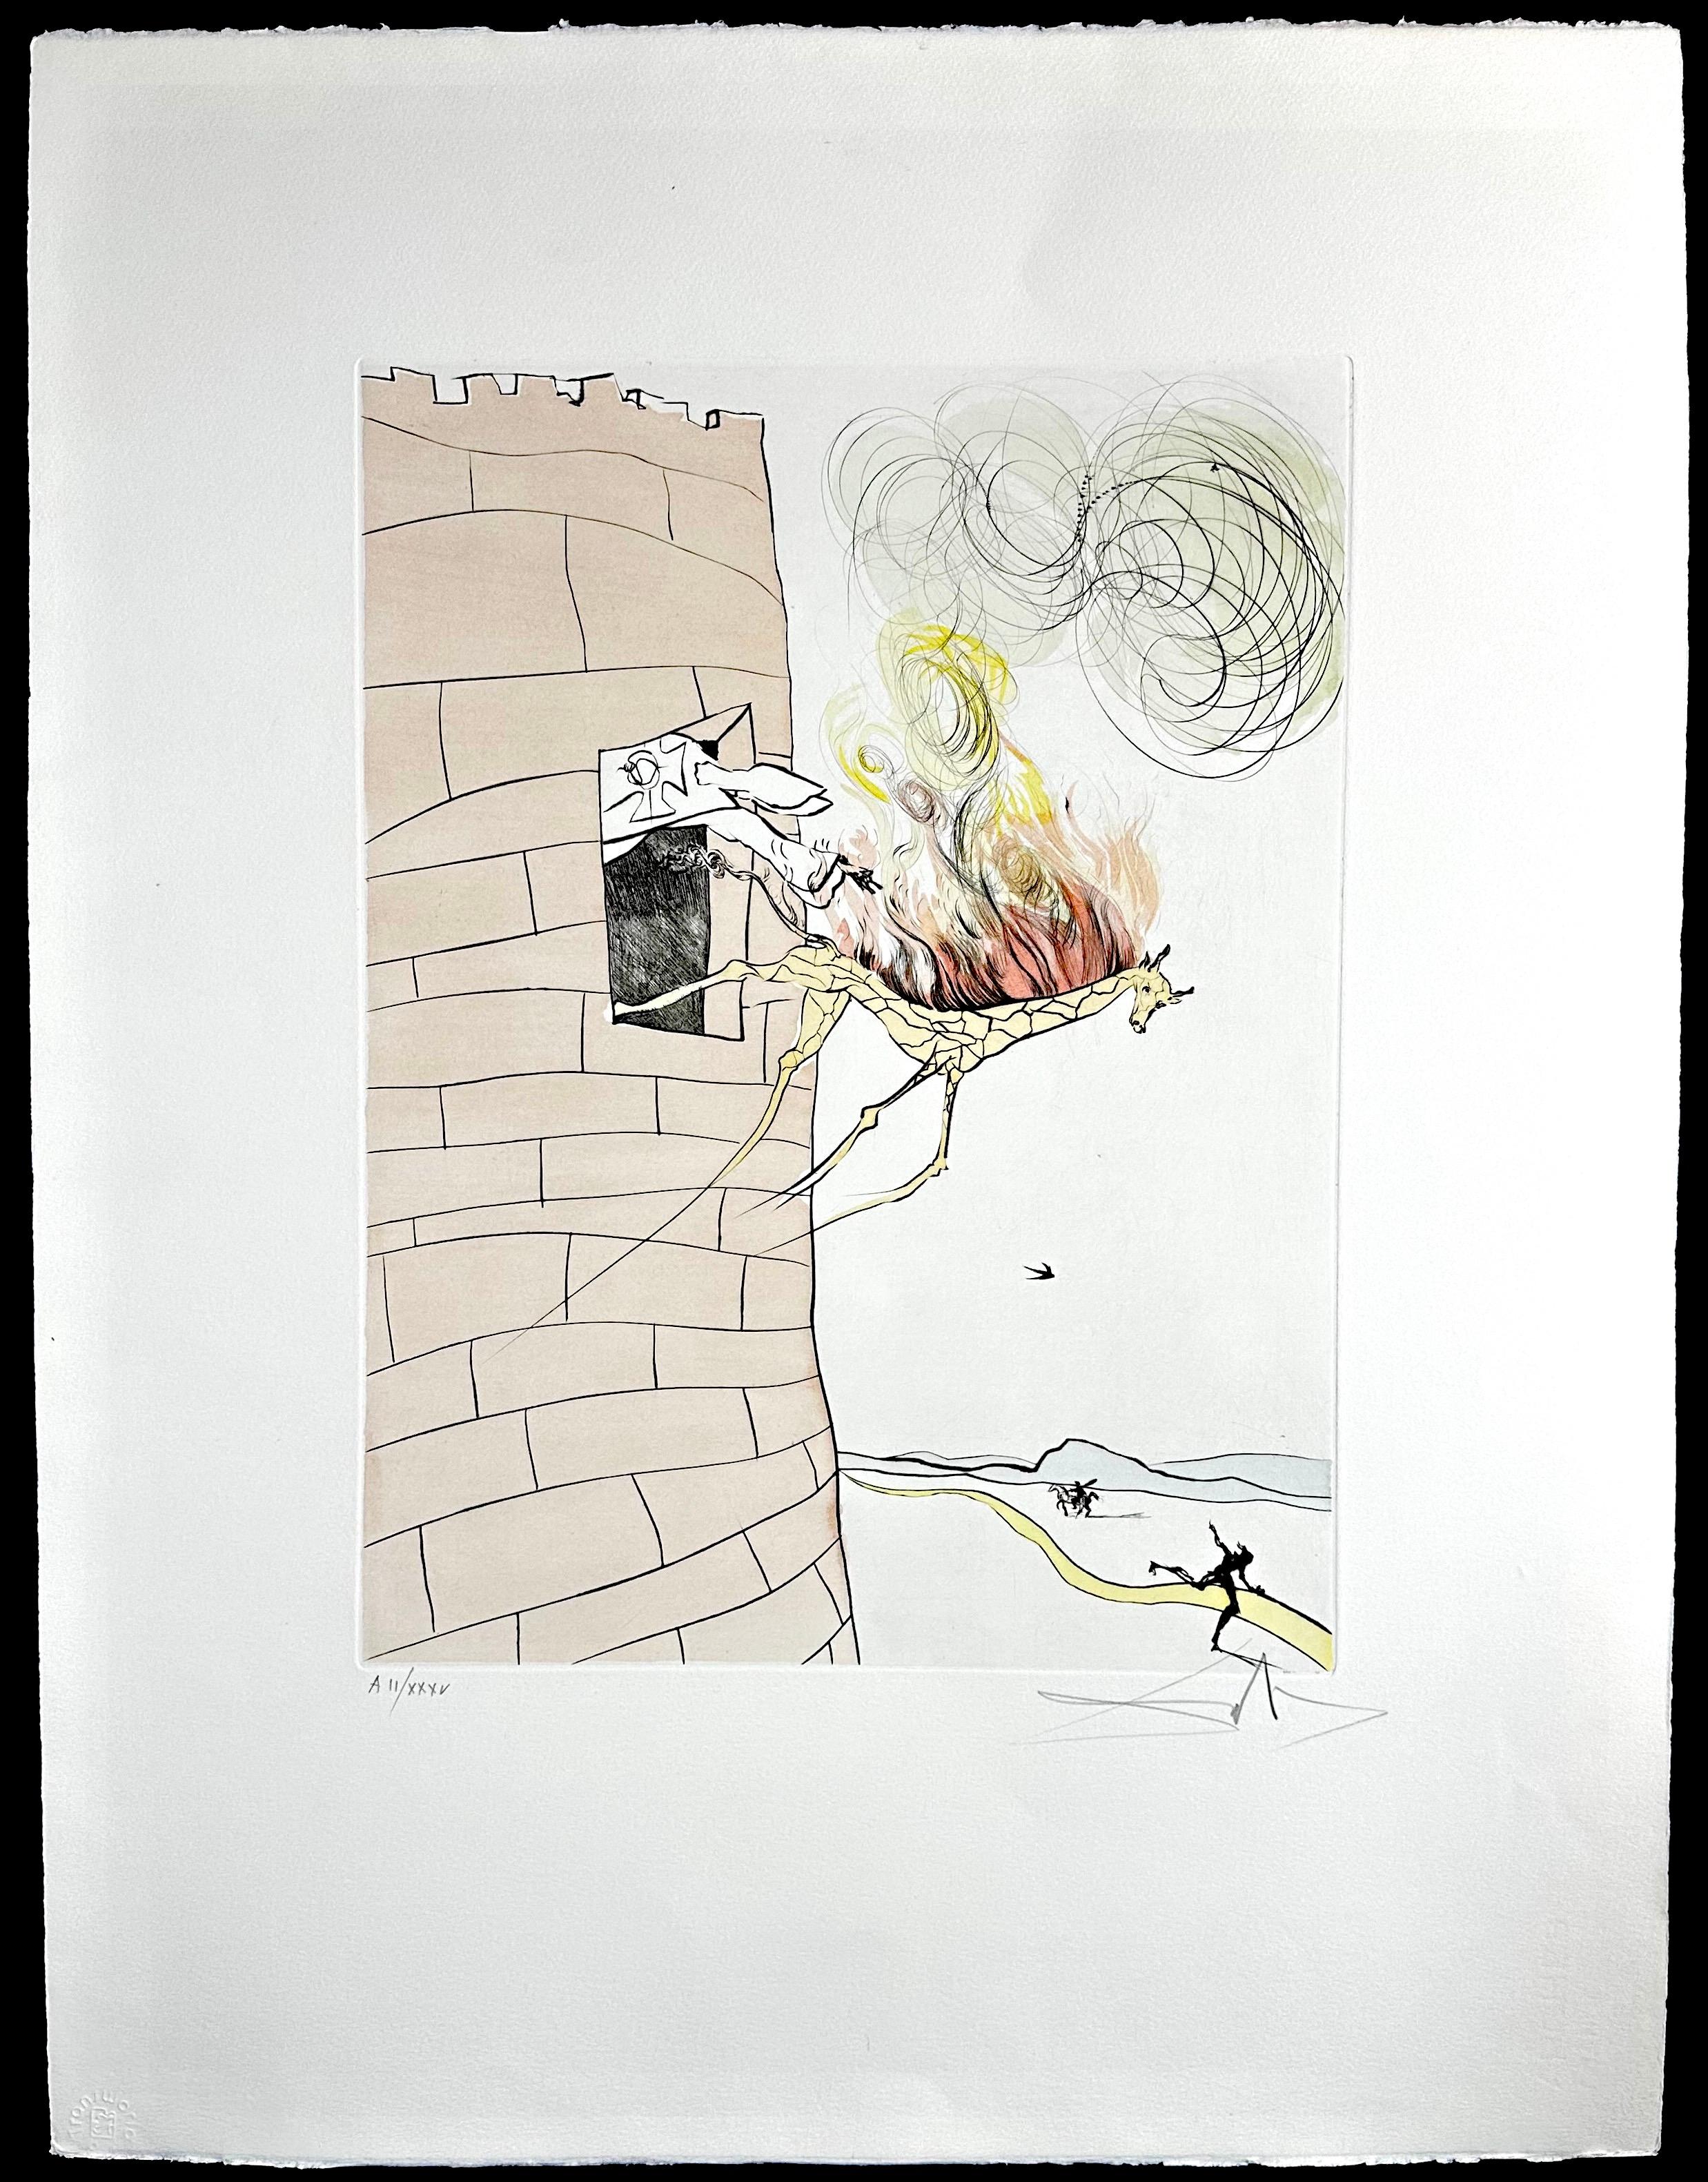 Salvador Dalí Print - After 50 Years of Surrealism The Grand Inquisitor Expels The Savior